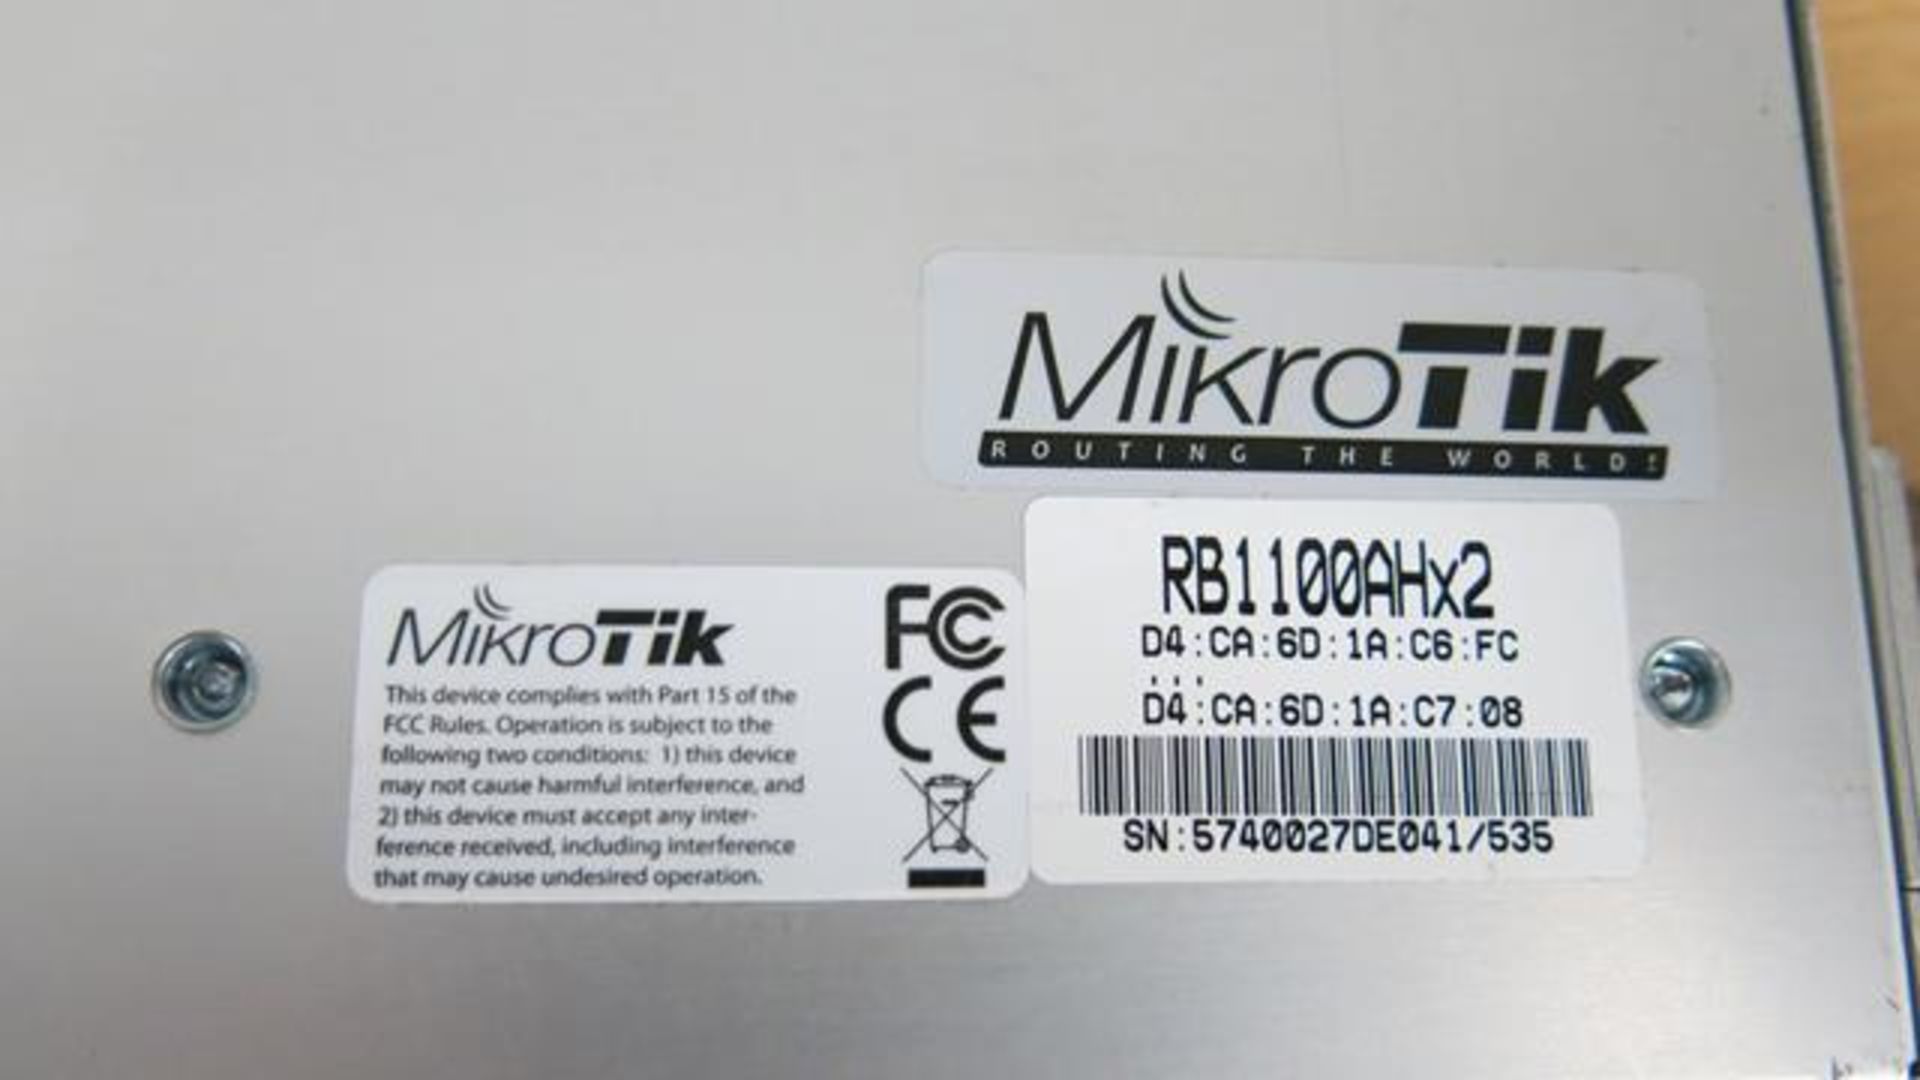 MIKROTIK, ROUTERBOARD 1100 AH, ROUTER (TAG#326) - Image 2 of 2